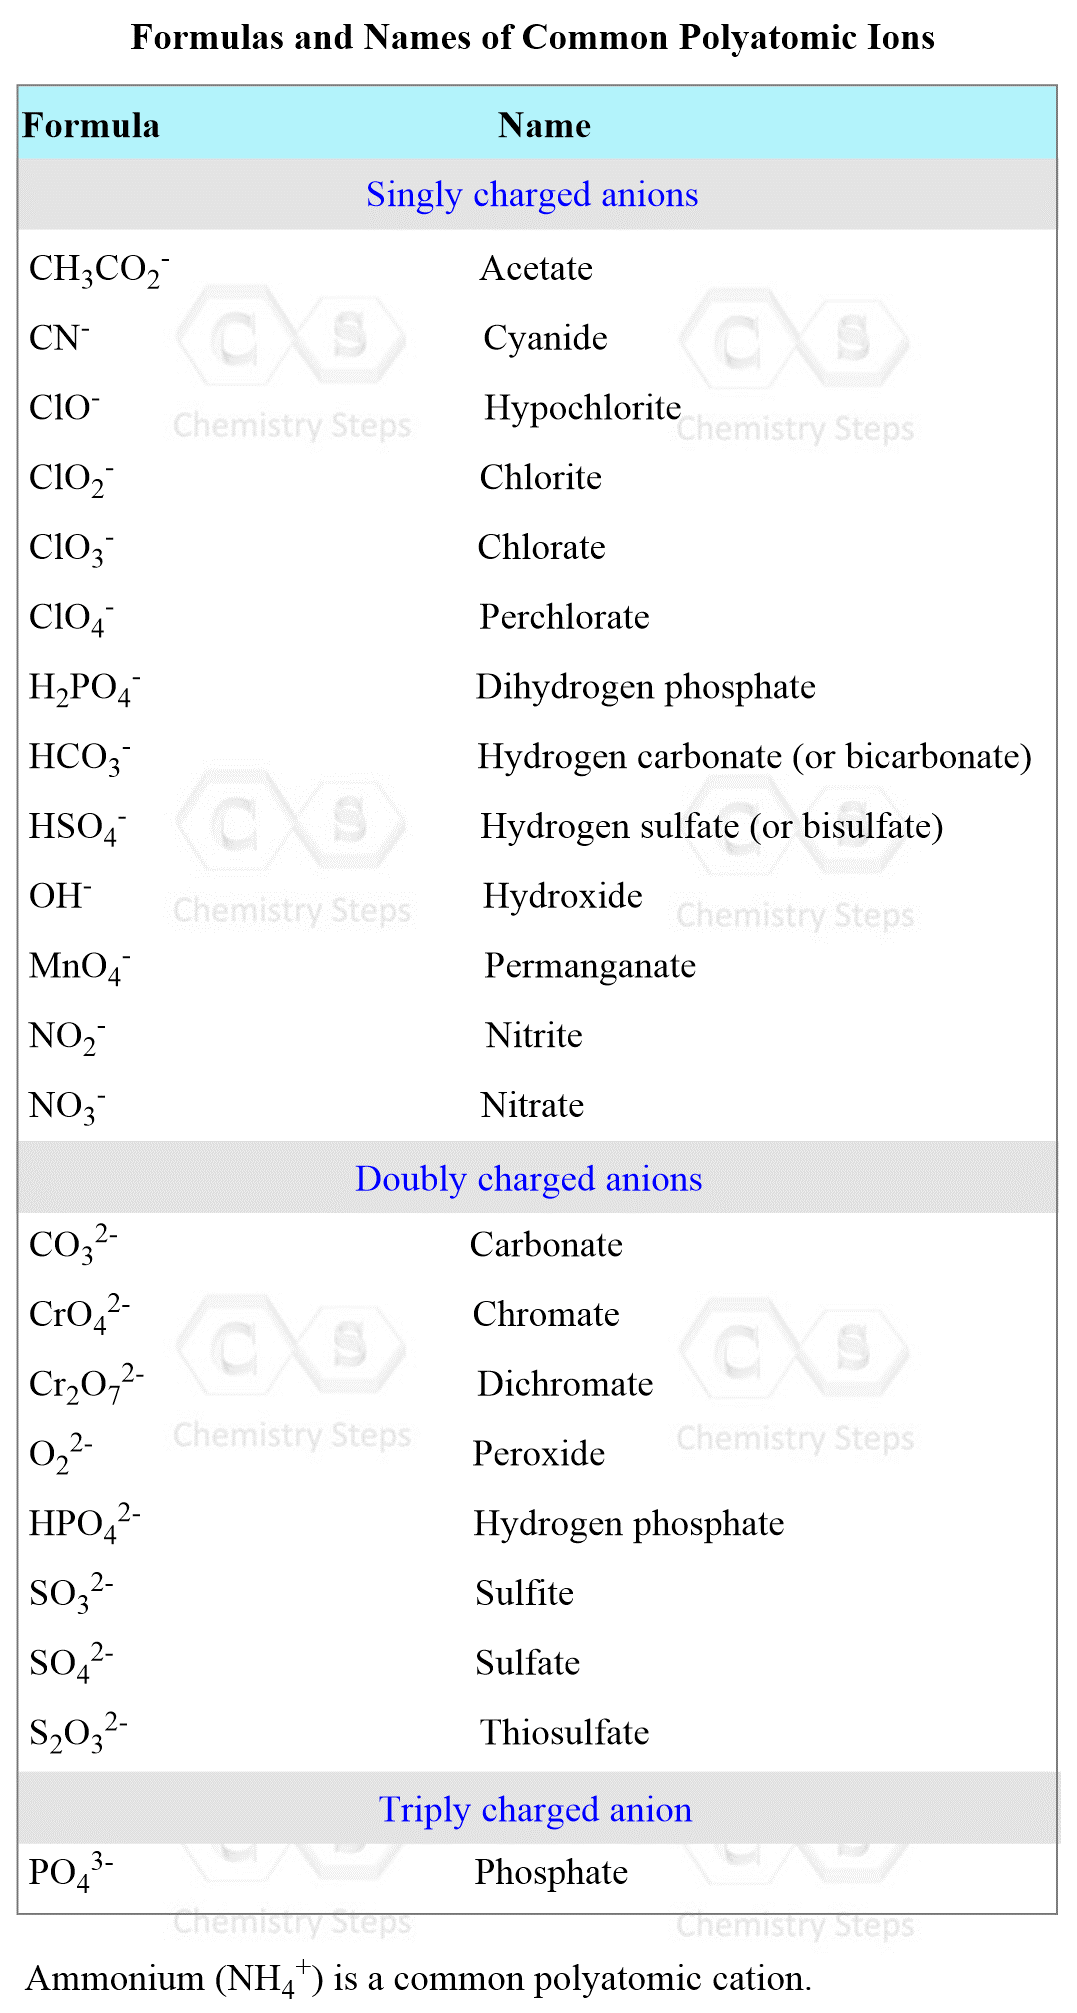 Formulas and Names of Common Polyatomic Ions